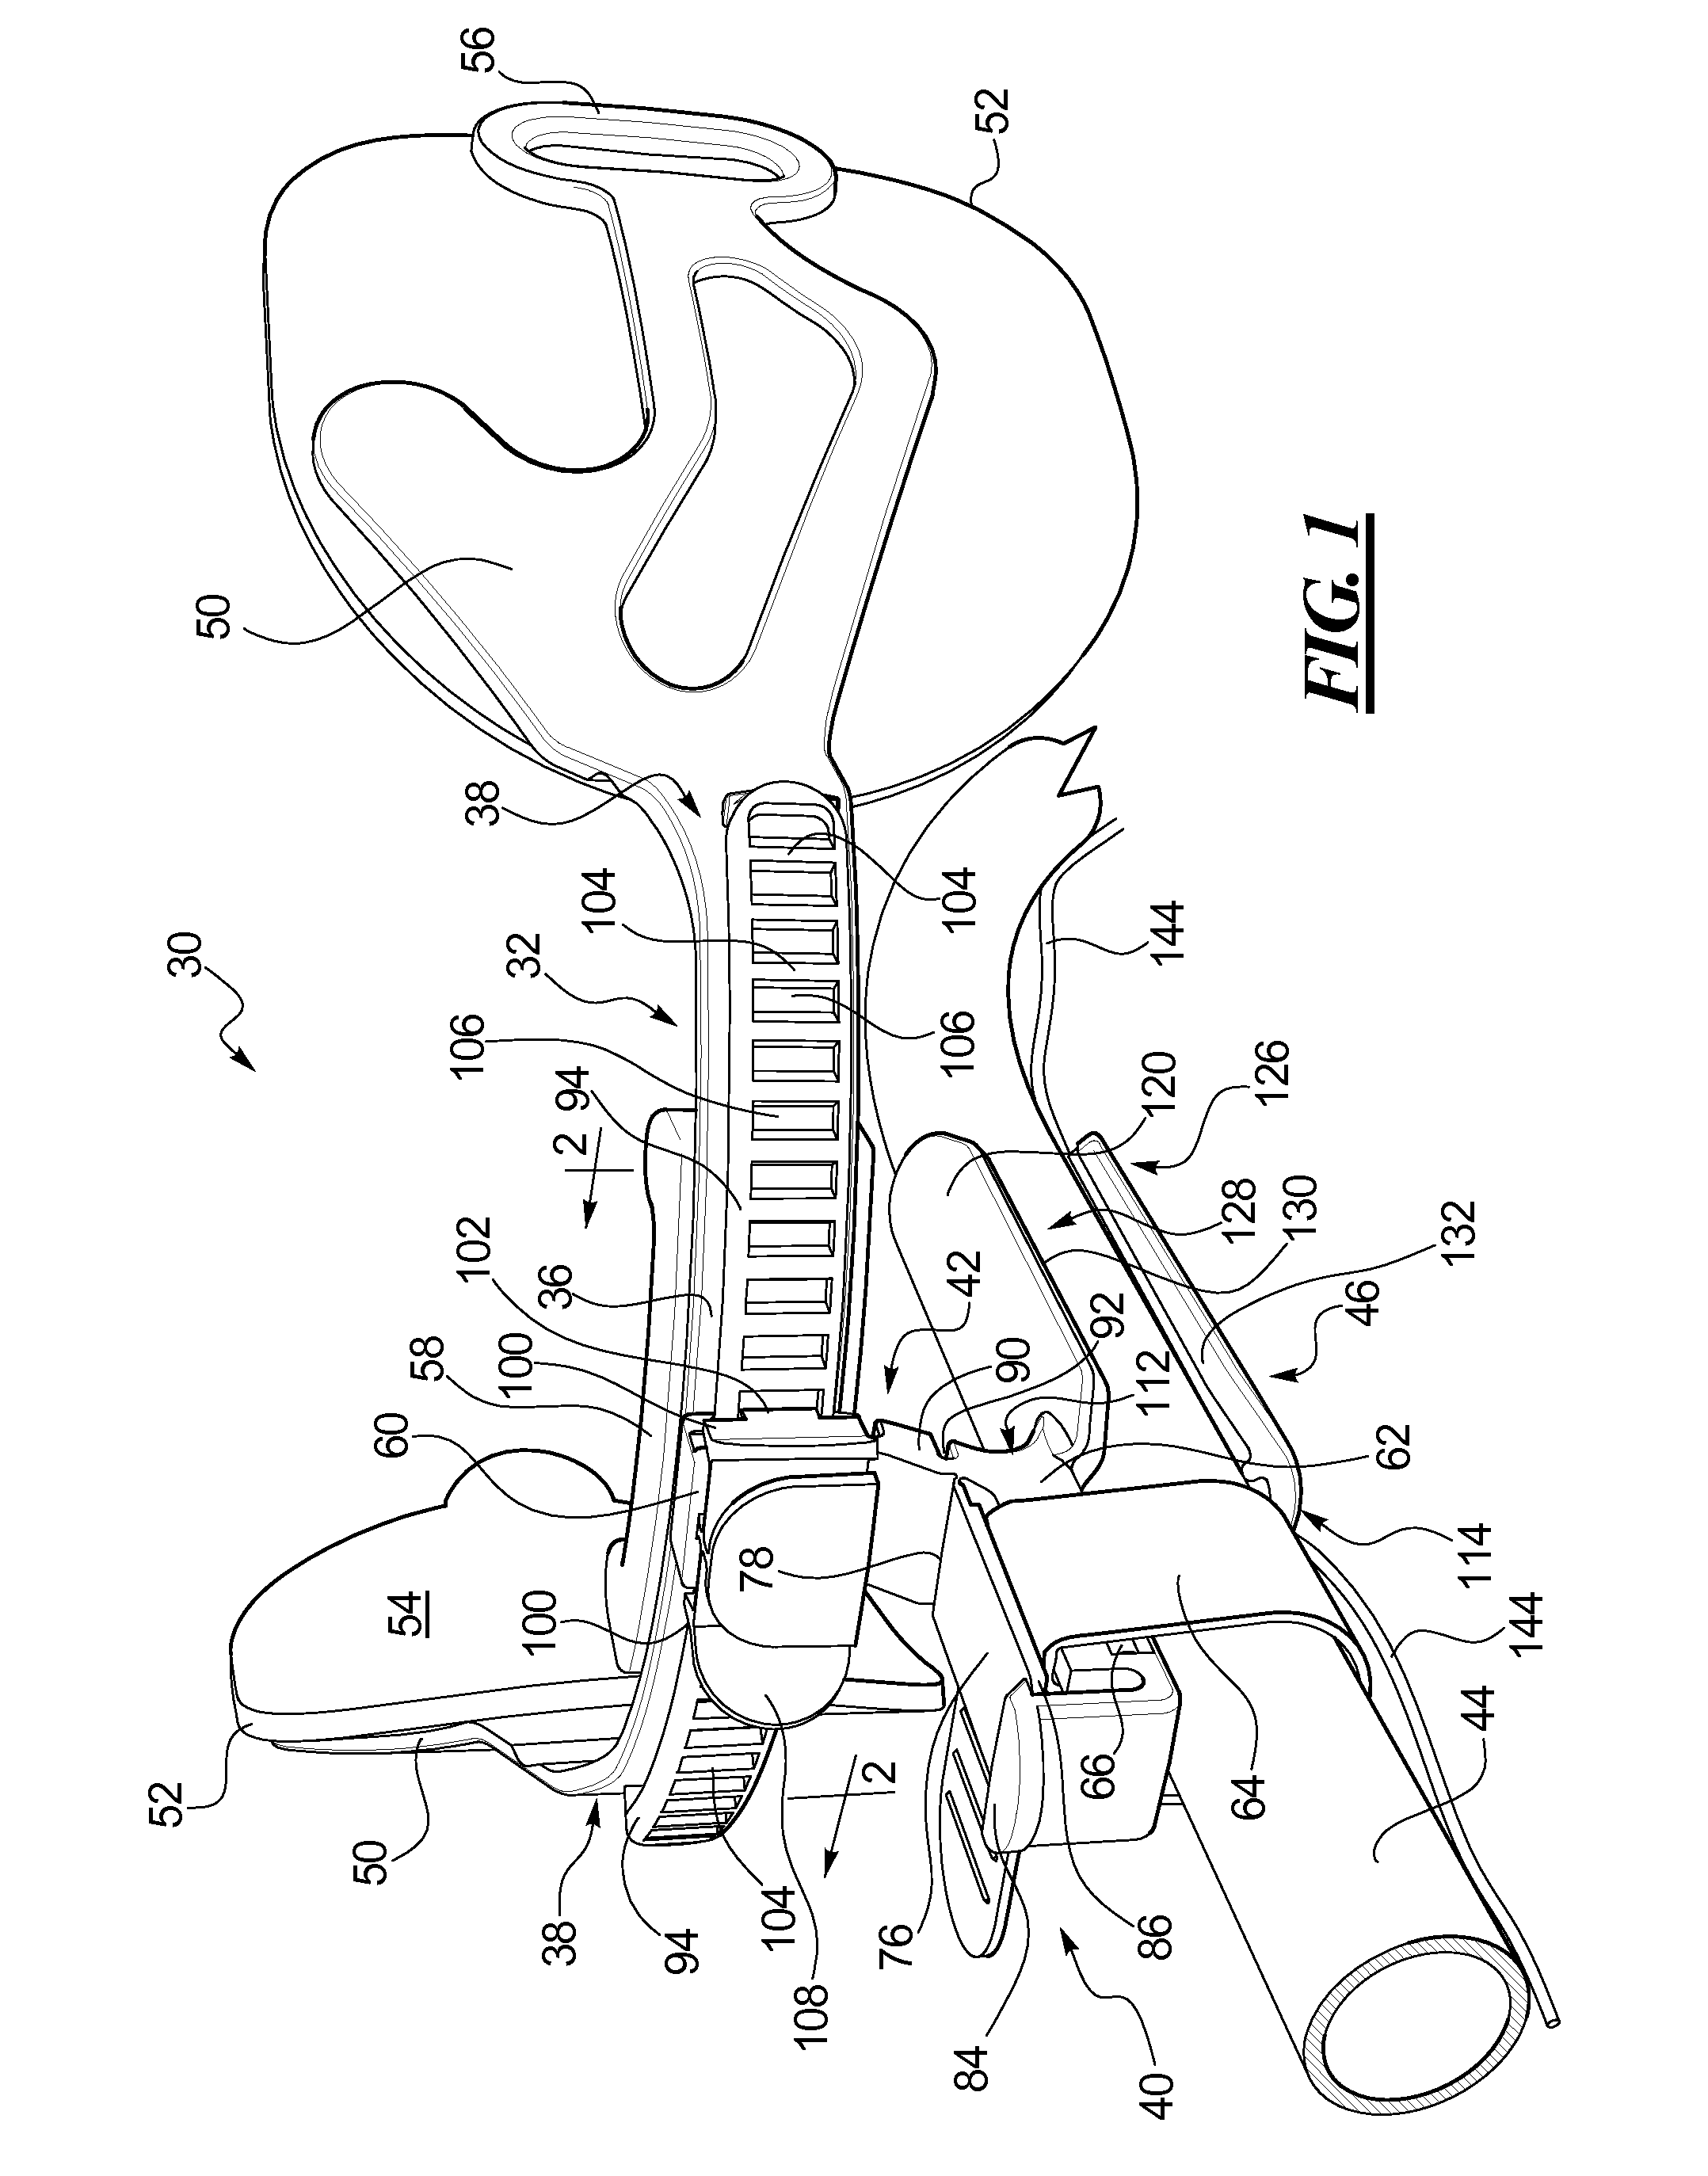 Endotrachael Tube Holding Device with Bite Block